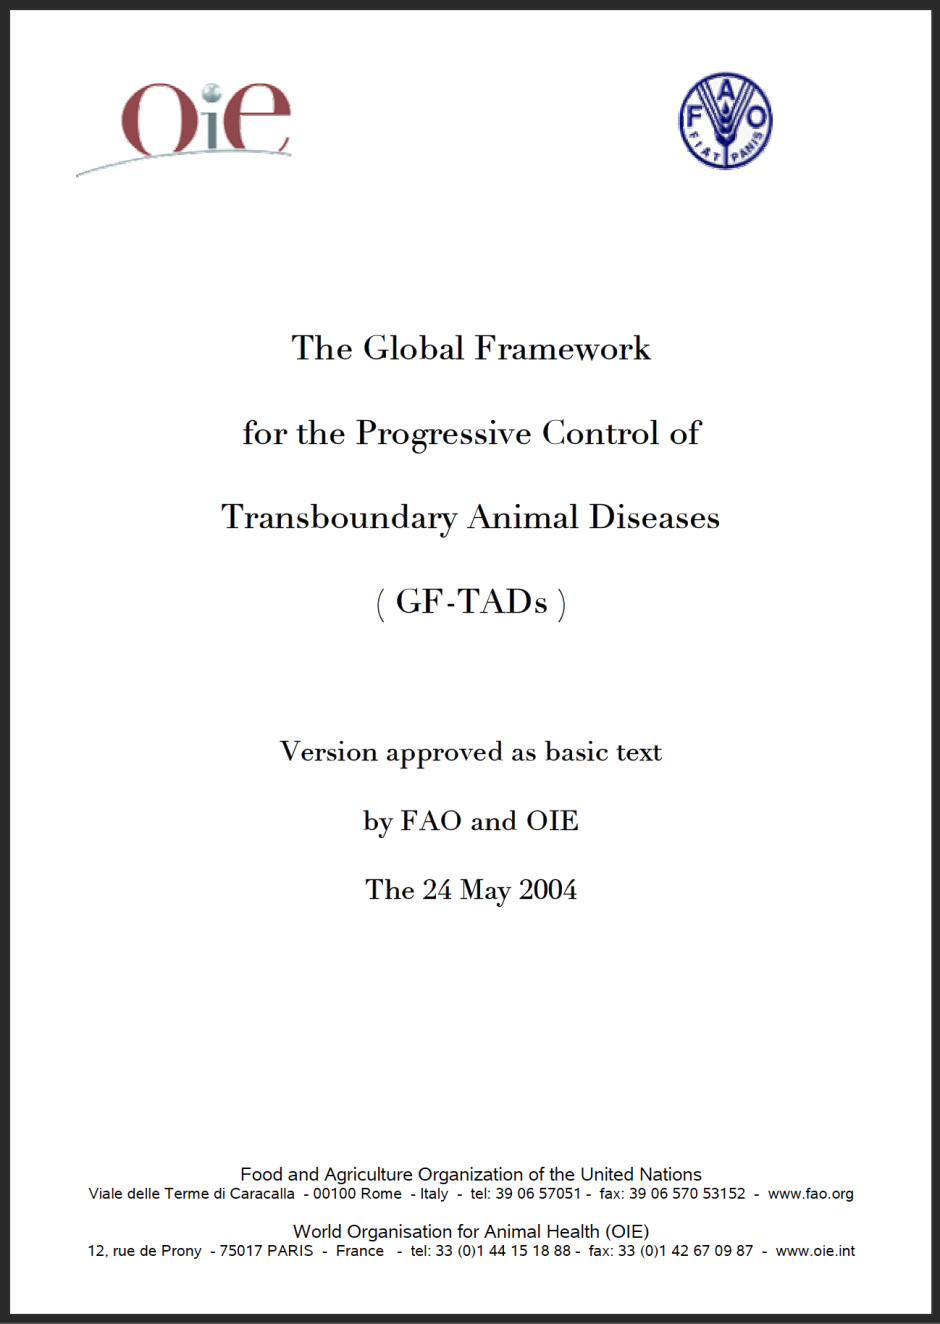 Specific Agreement with FAO : The Global Framework for the Progressive Control of Transboundary Animal Diseases (GF-TADs)